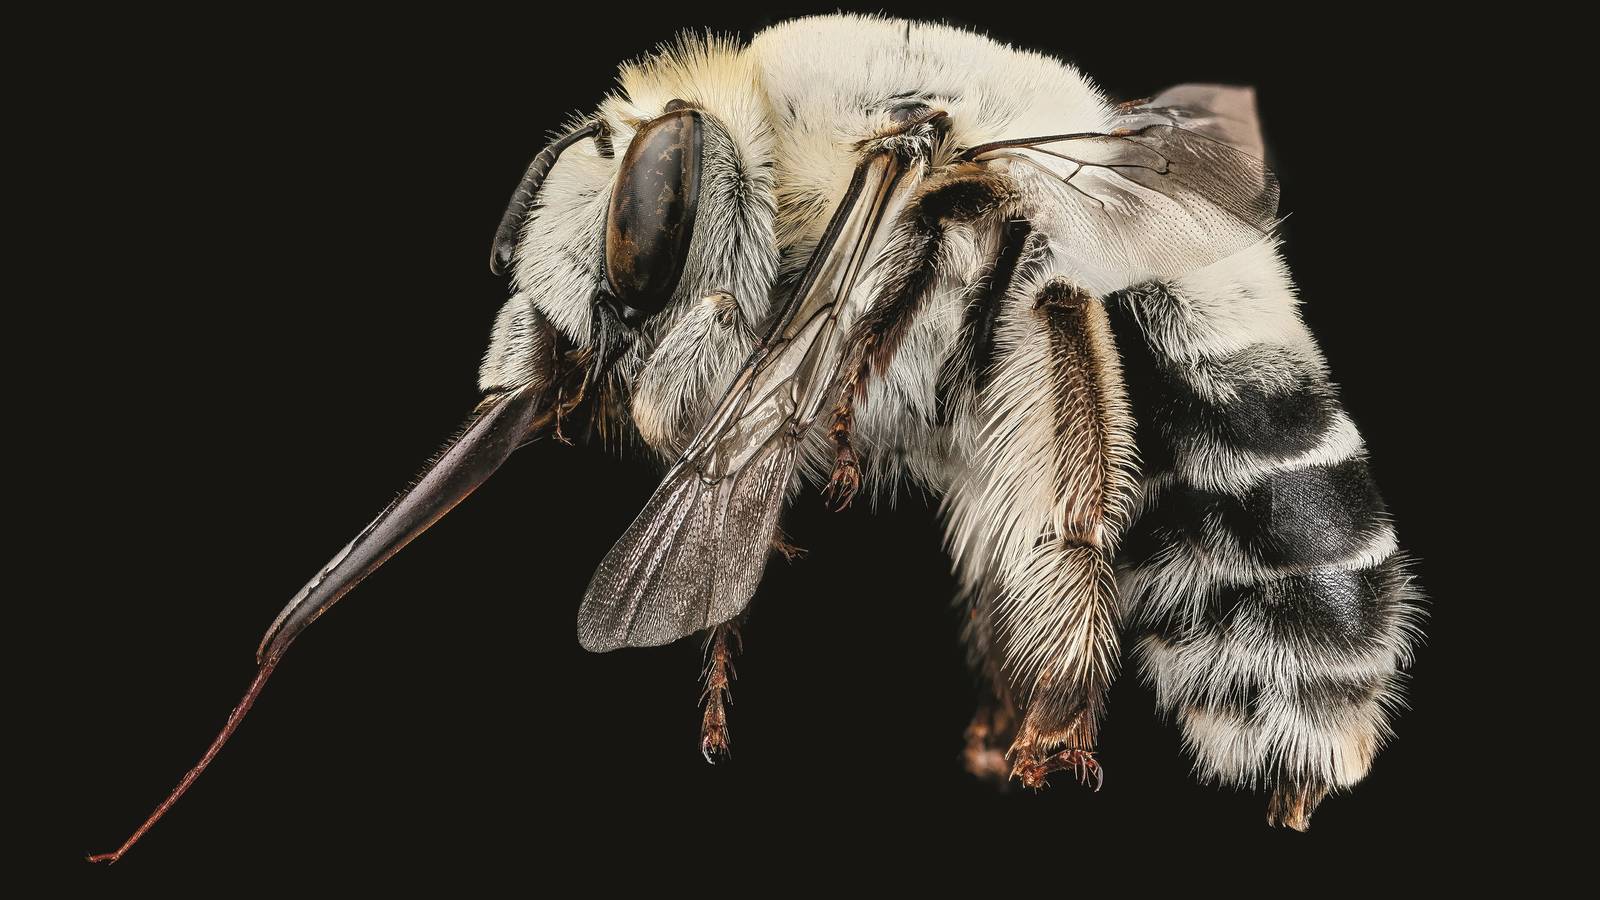 <h3 style="text-align: center; padding: 50px;"><span class="text-Intro-style"><em>Anthophora affabilis</em> (bee), Badlands National Park, South Dakota. © SAM DROEGE/USGS BEE INVENTORY AND MONITORING LAB</span></h3>